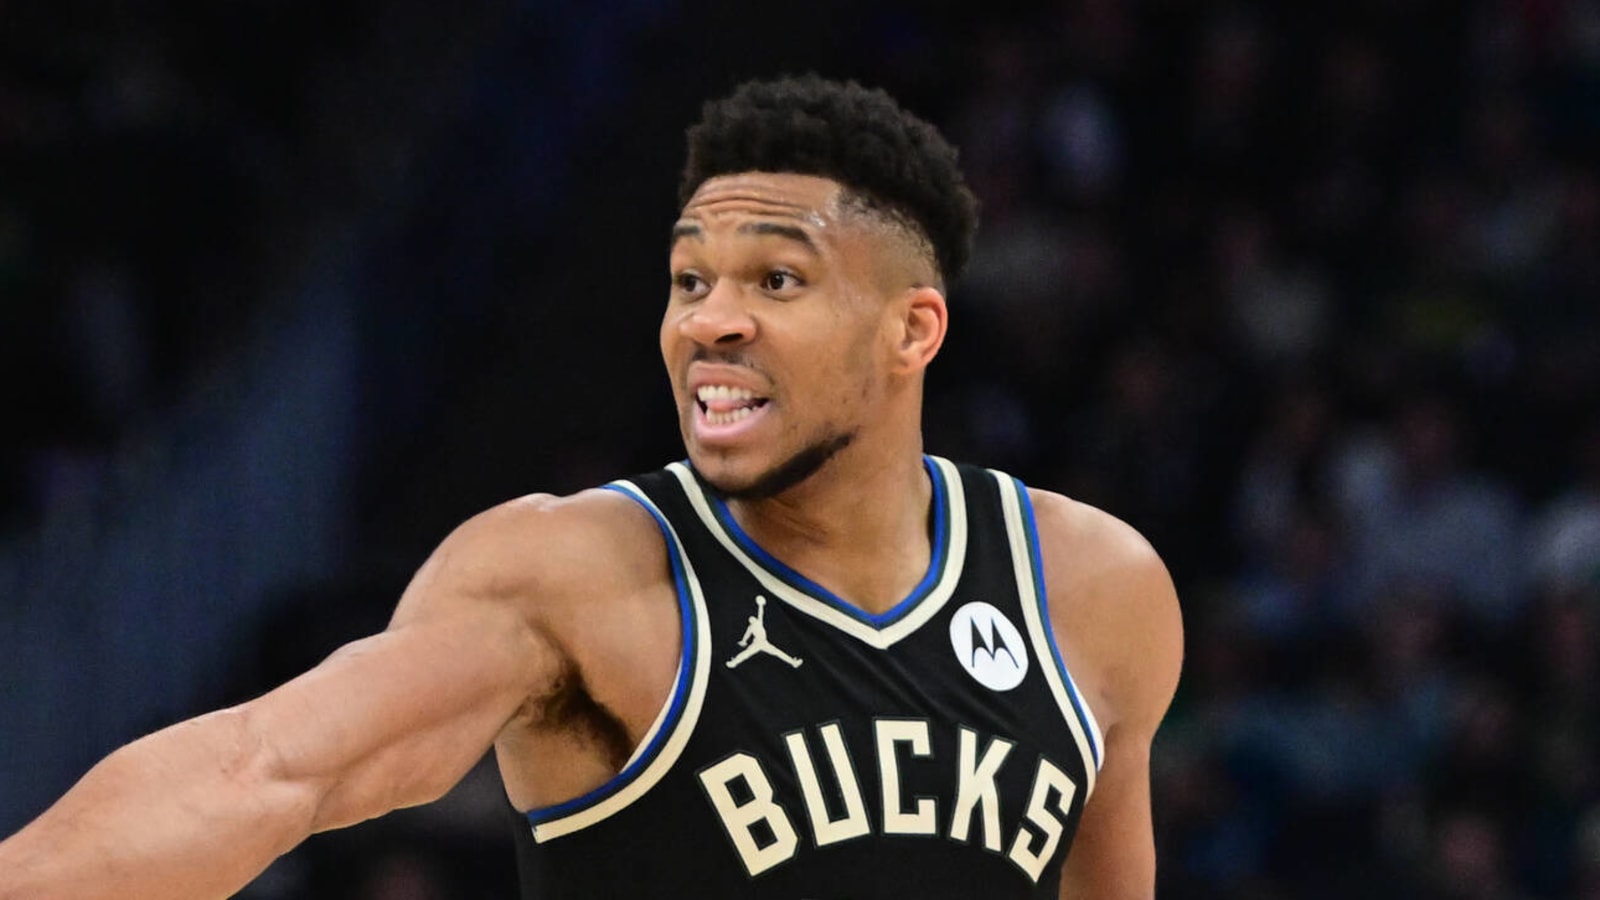 Troubling report emerges about Giannis Antetokounmpo’s playoff status